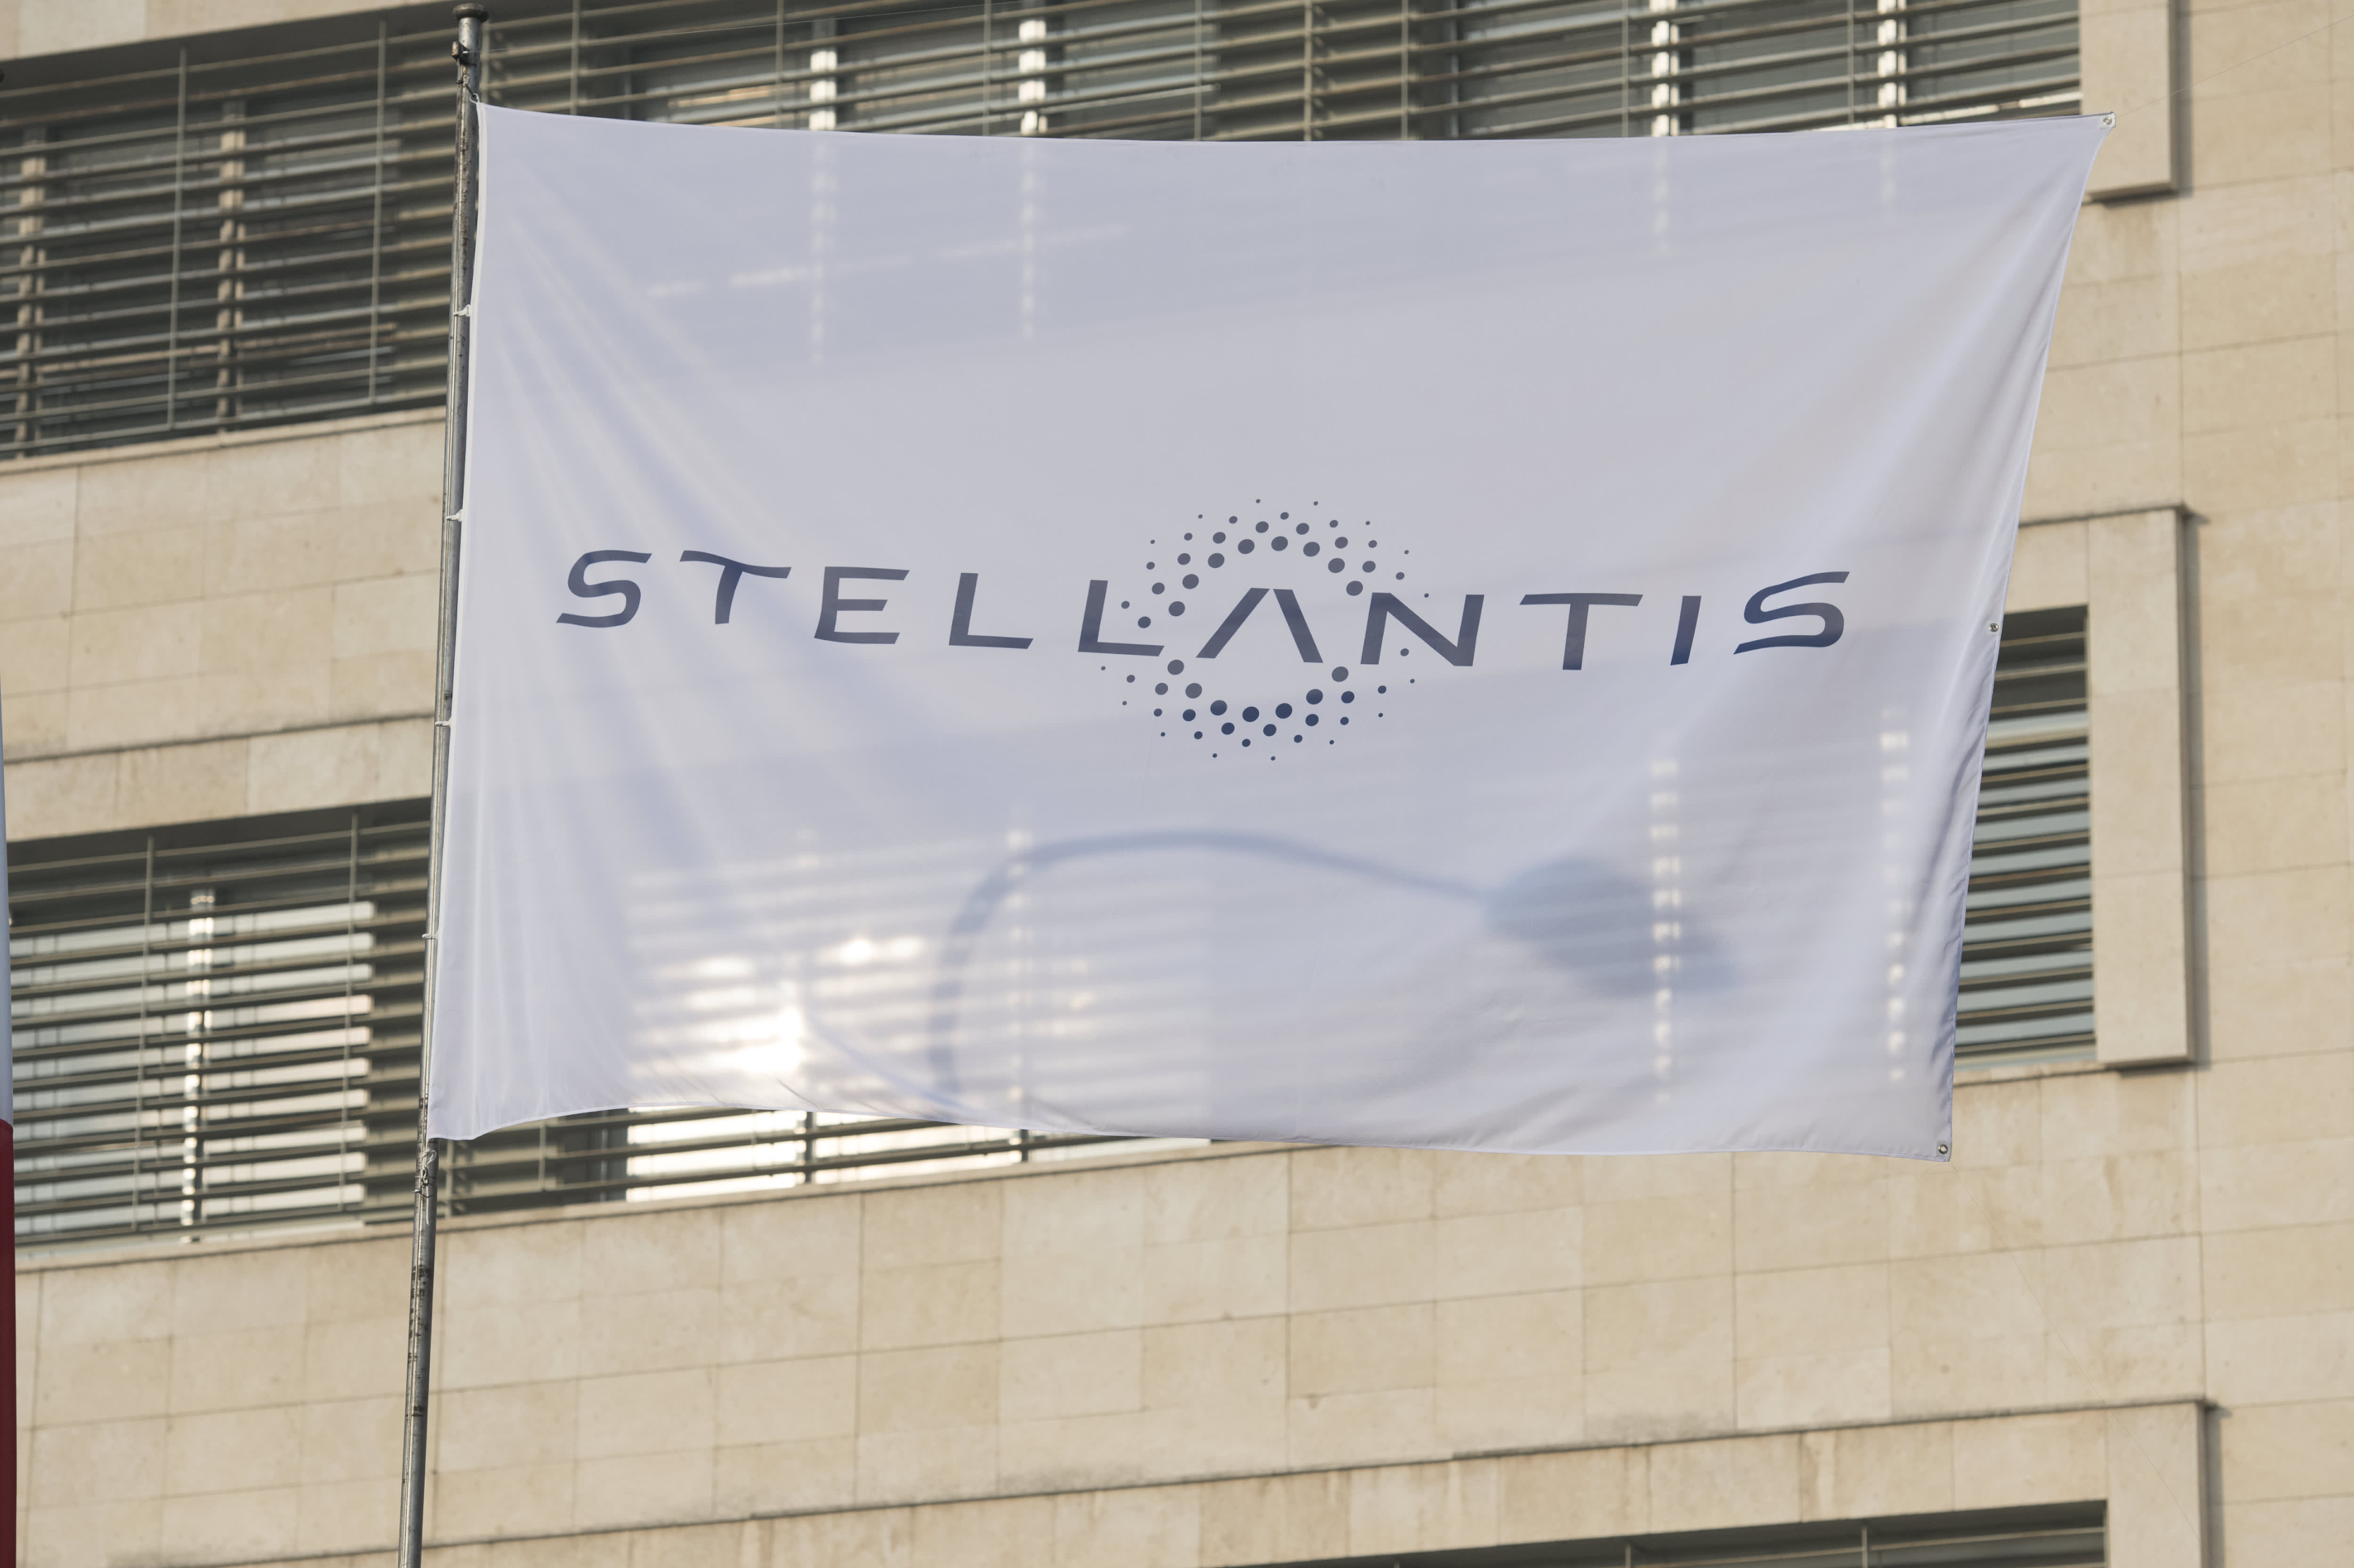 What to know about Stellantis as it makes its NYSE debut